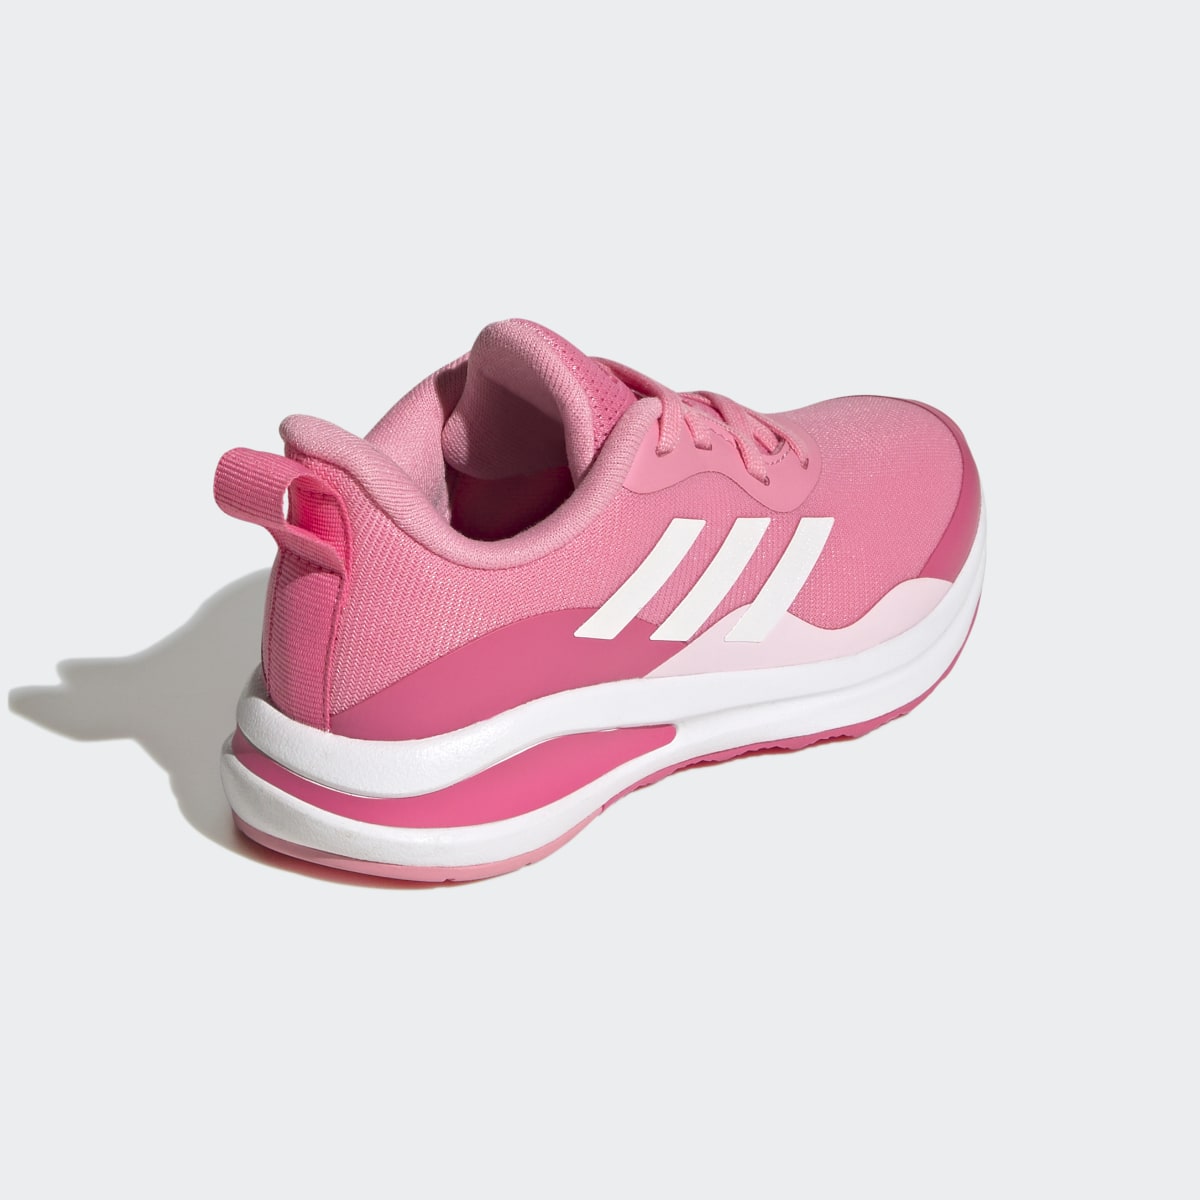 Adidas FortaRun Sport Running Lace Shoes. 6